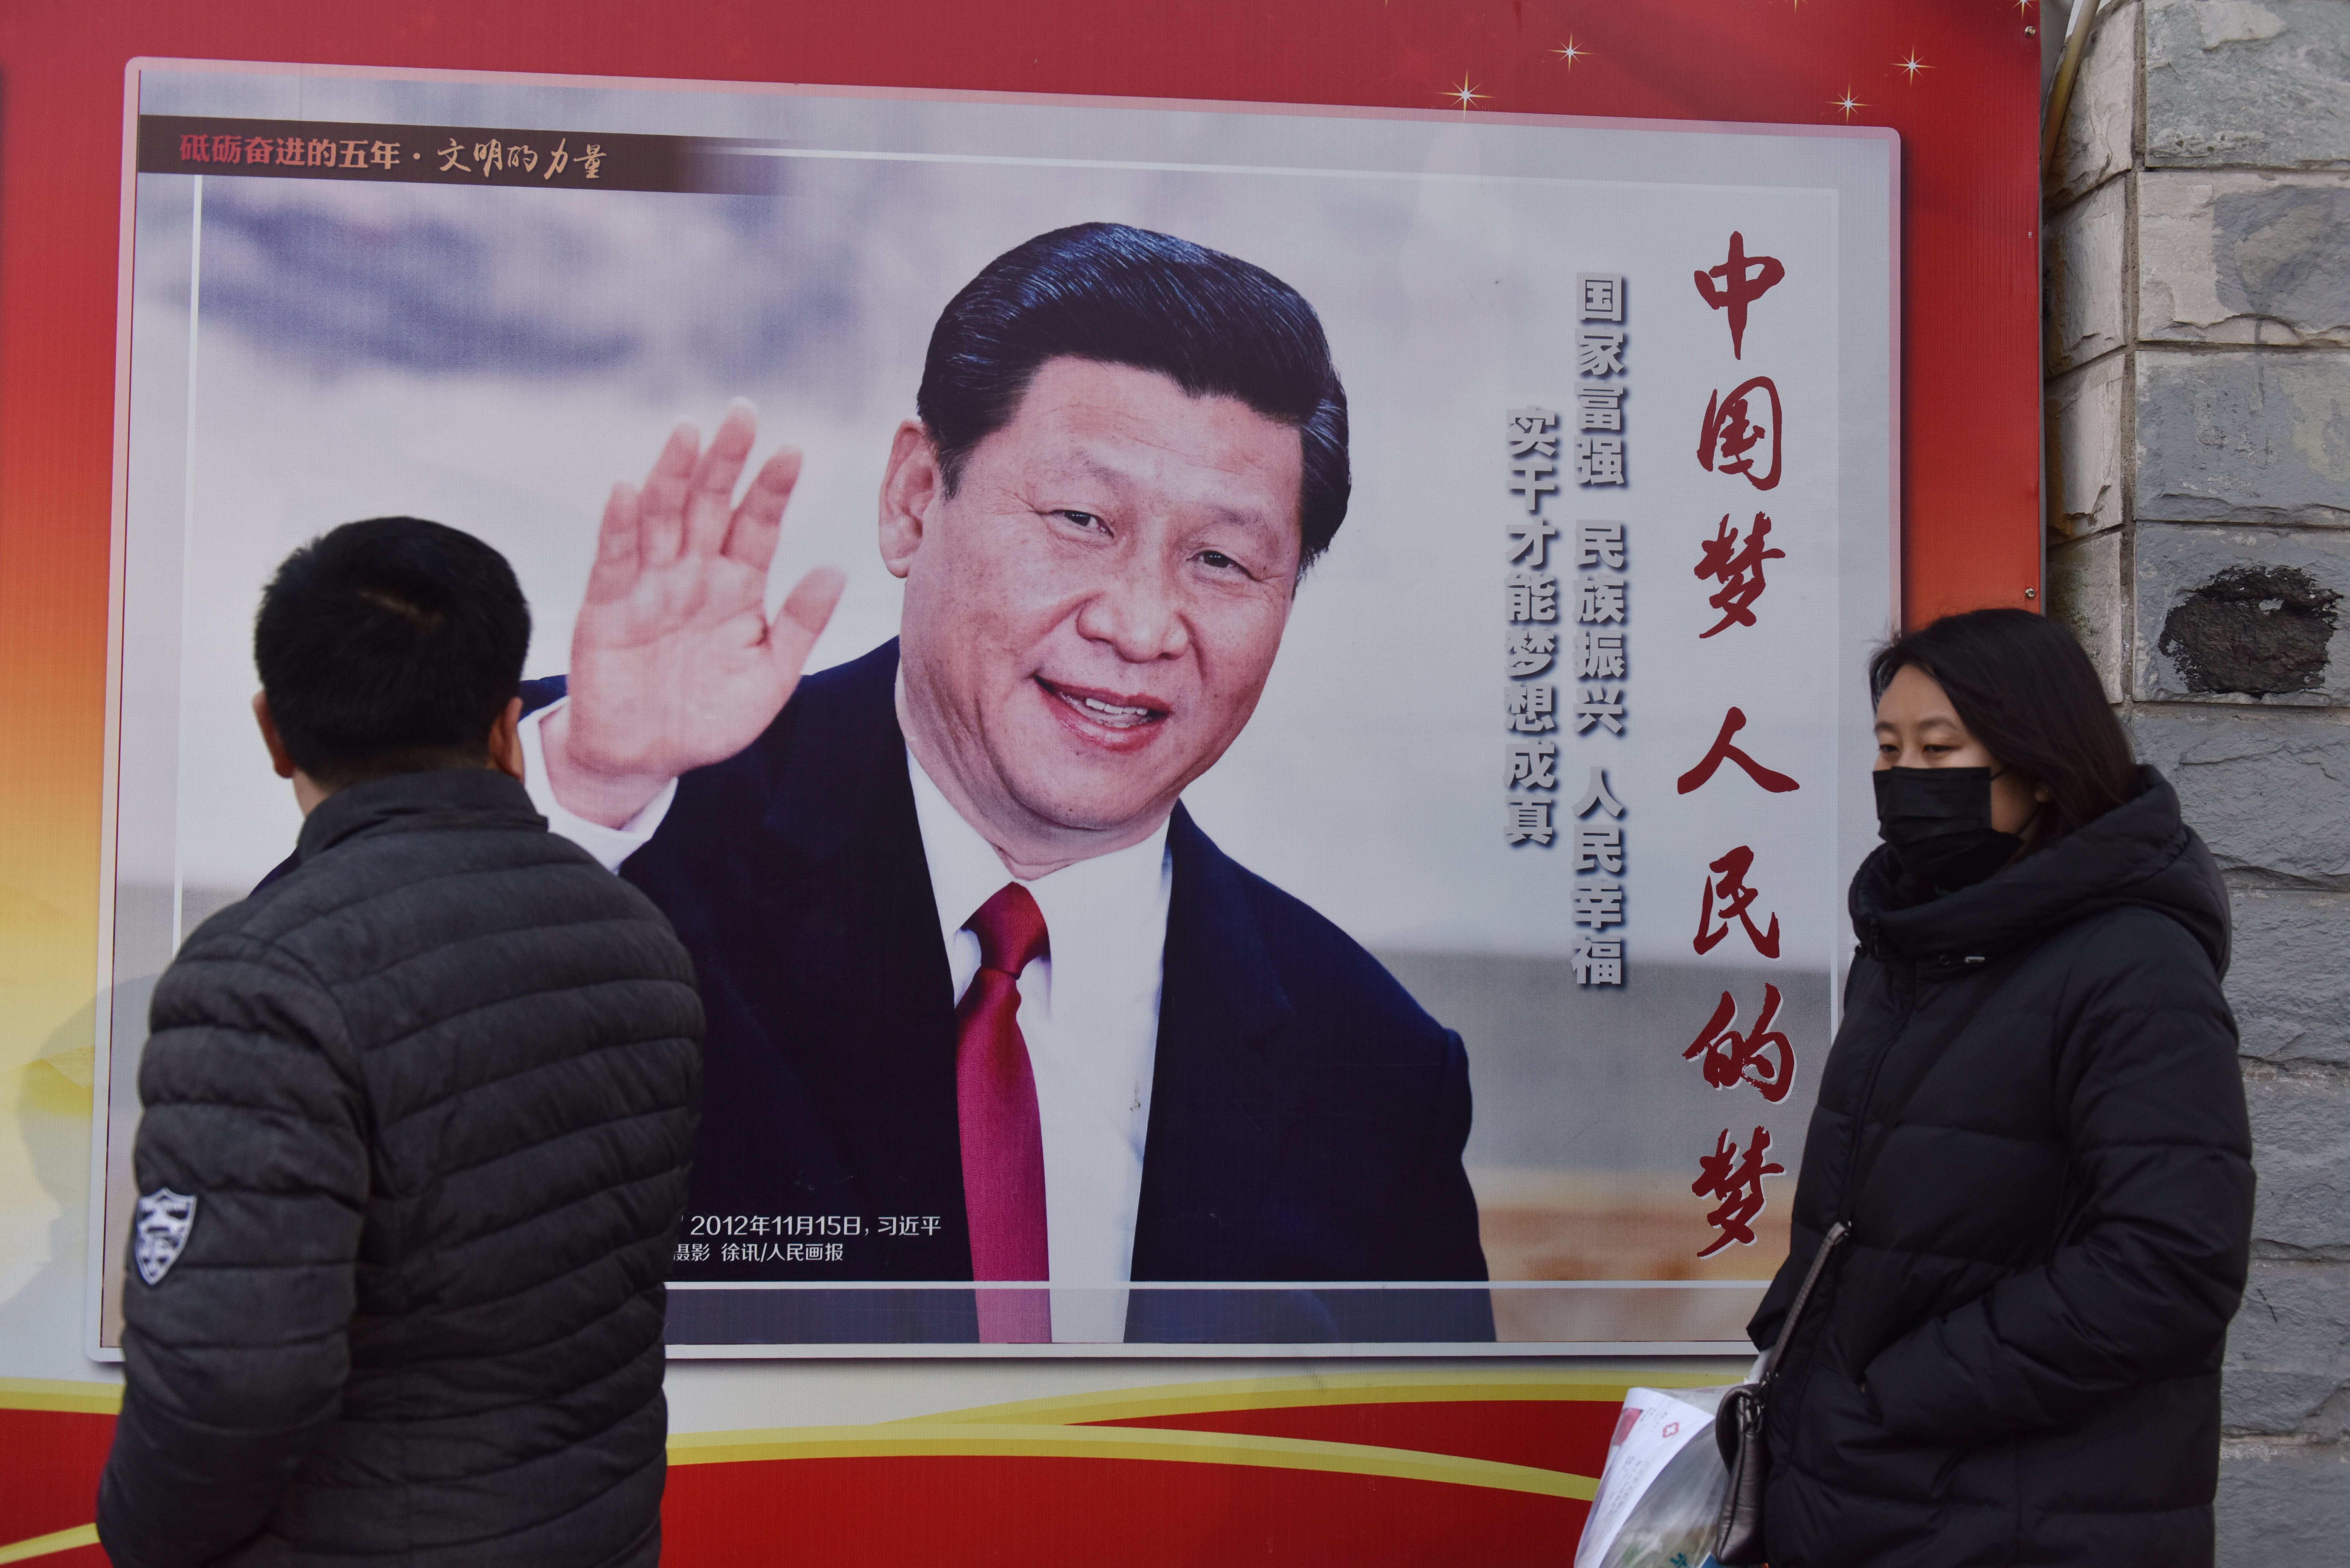 To a Chinese population healthier and wealthier than ever before, a perpetual presidency may seem a price worth paying. But turbulence – or worse – in the years ahead would make it far less compelling